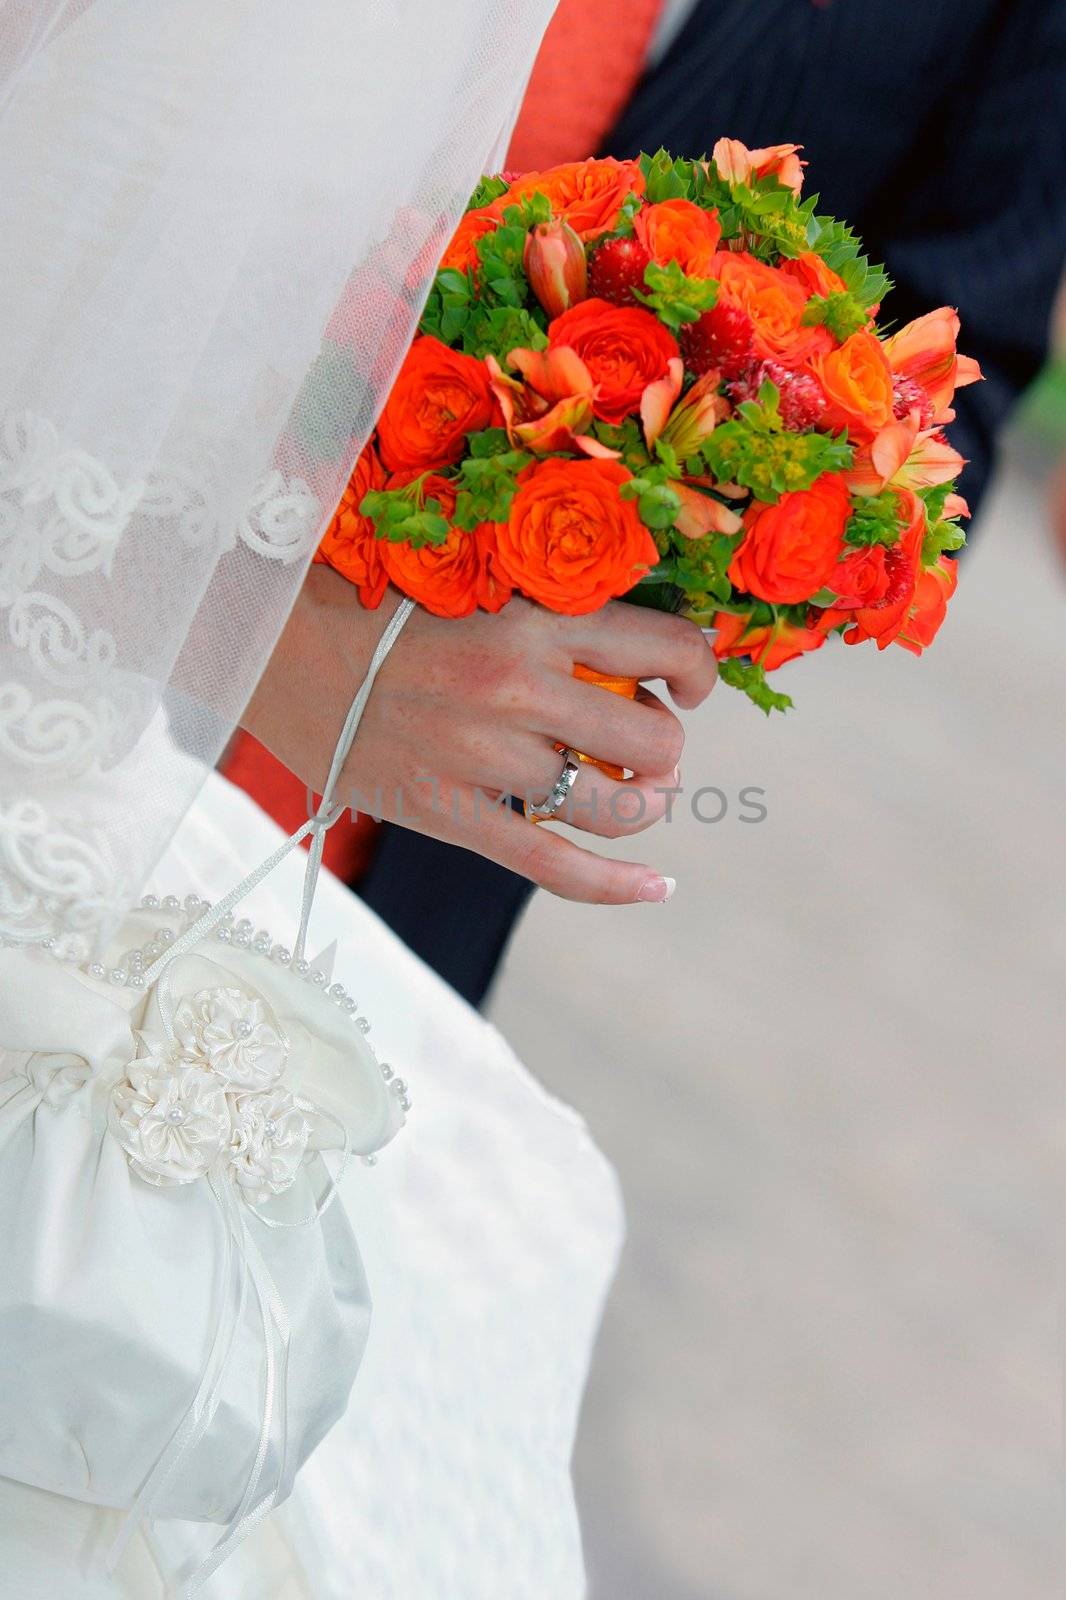 Bride in traditional white wedding dress with red bouquet of flowers.